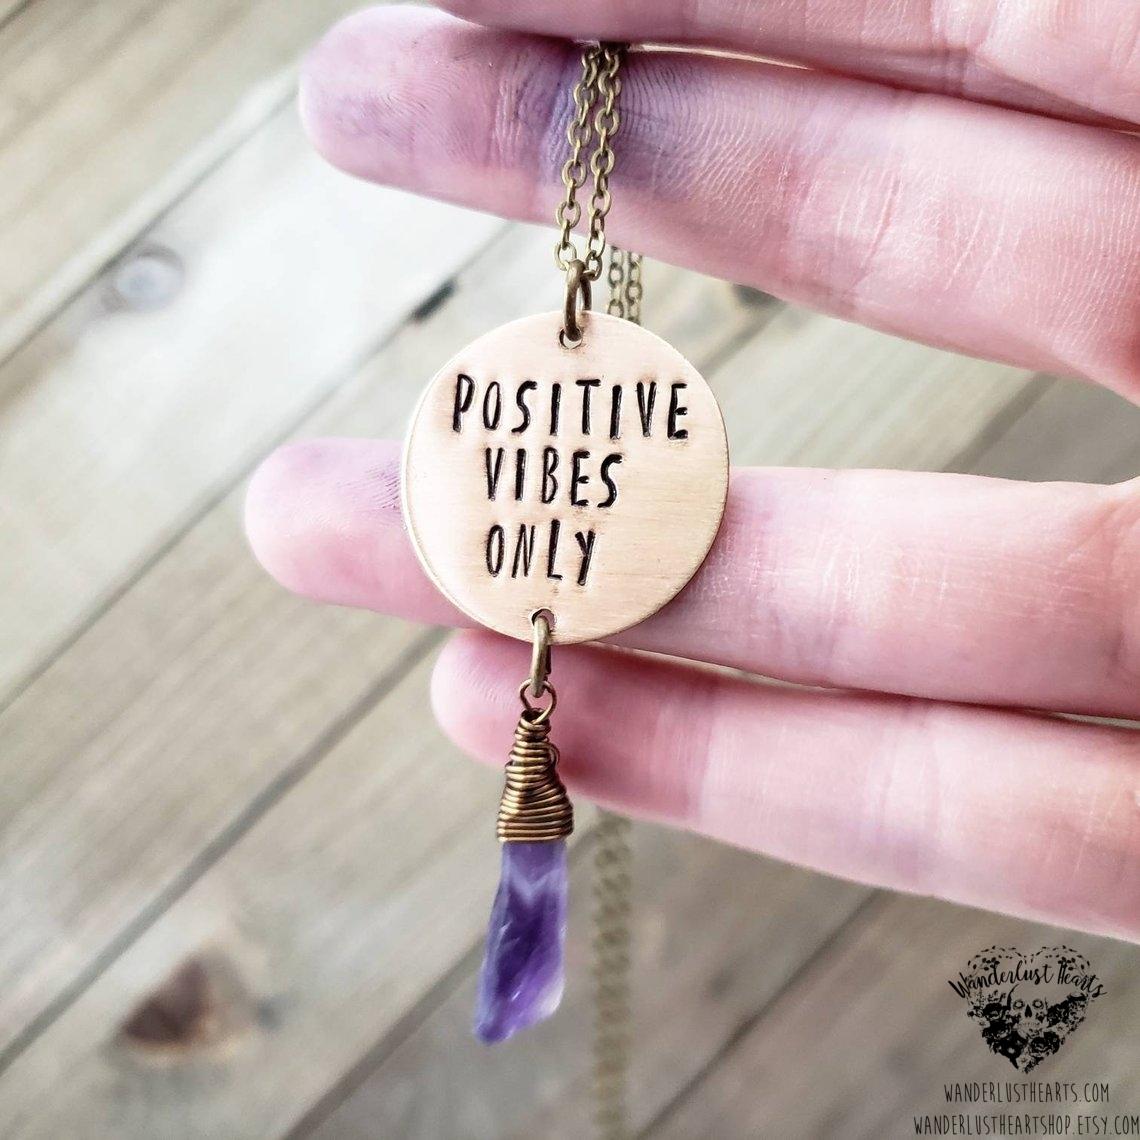 Positive vibes only necklace